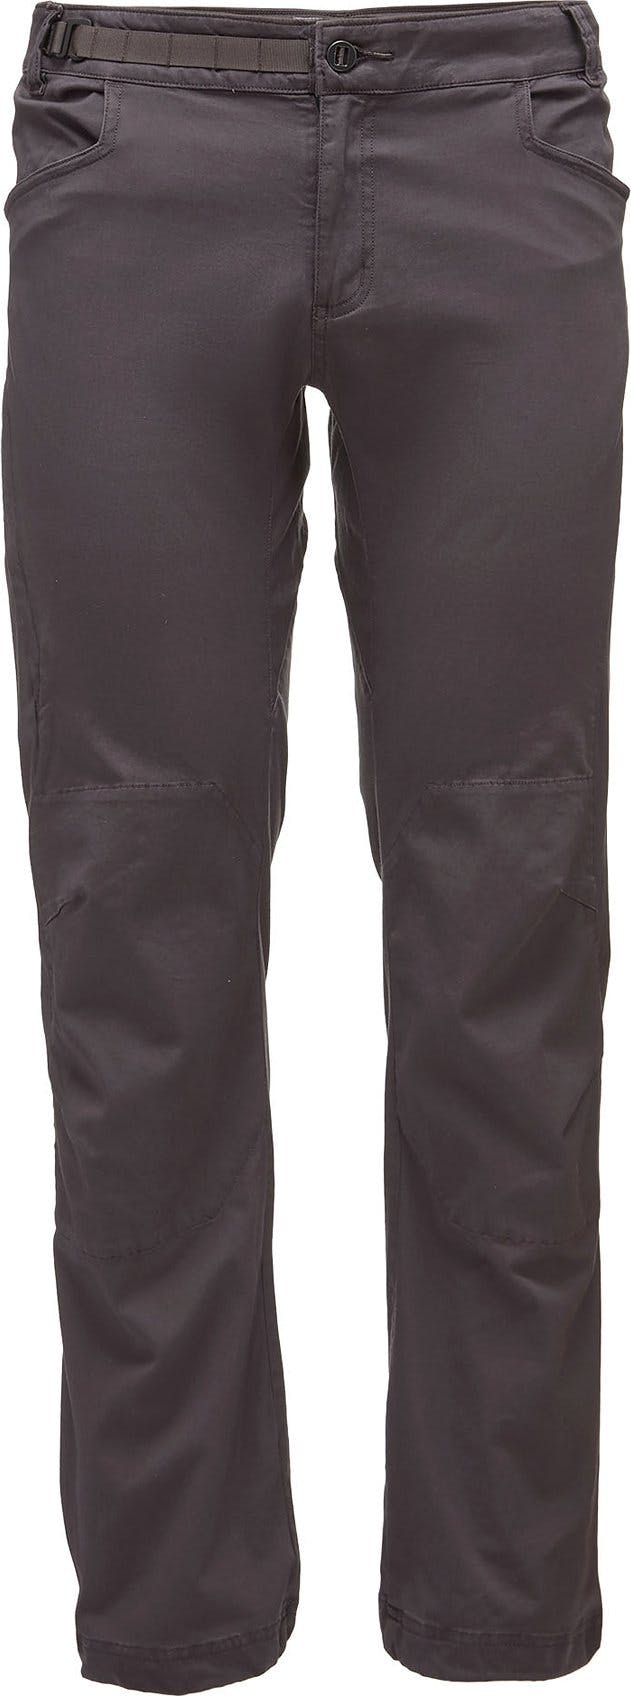 Product image for Credo Pants - Men's